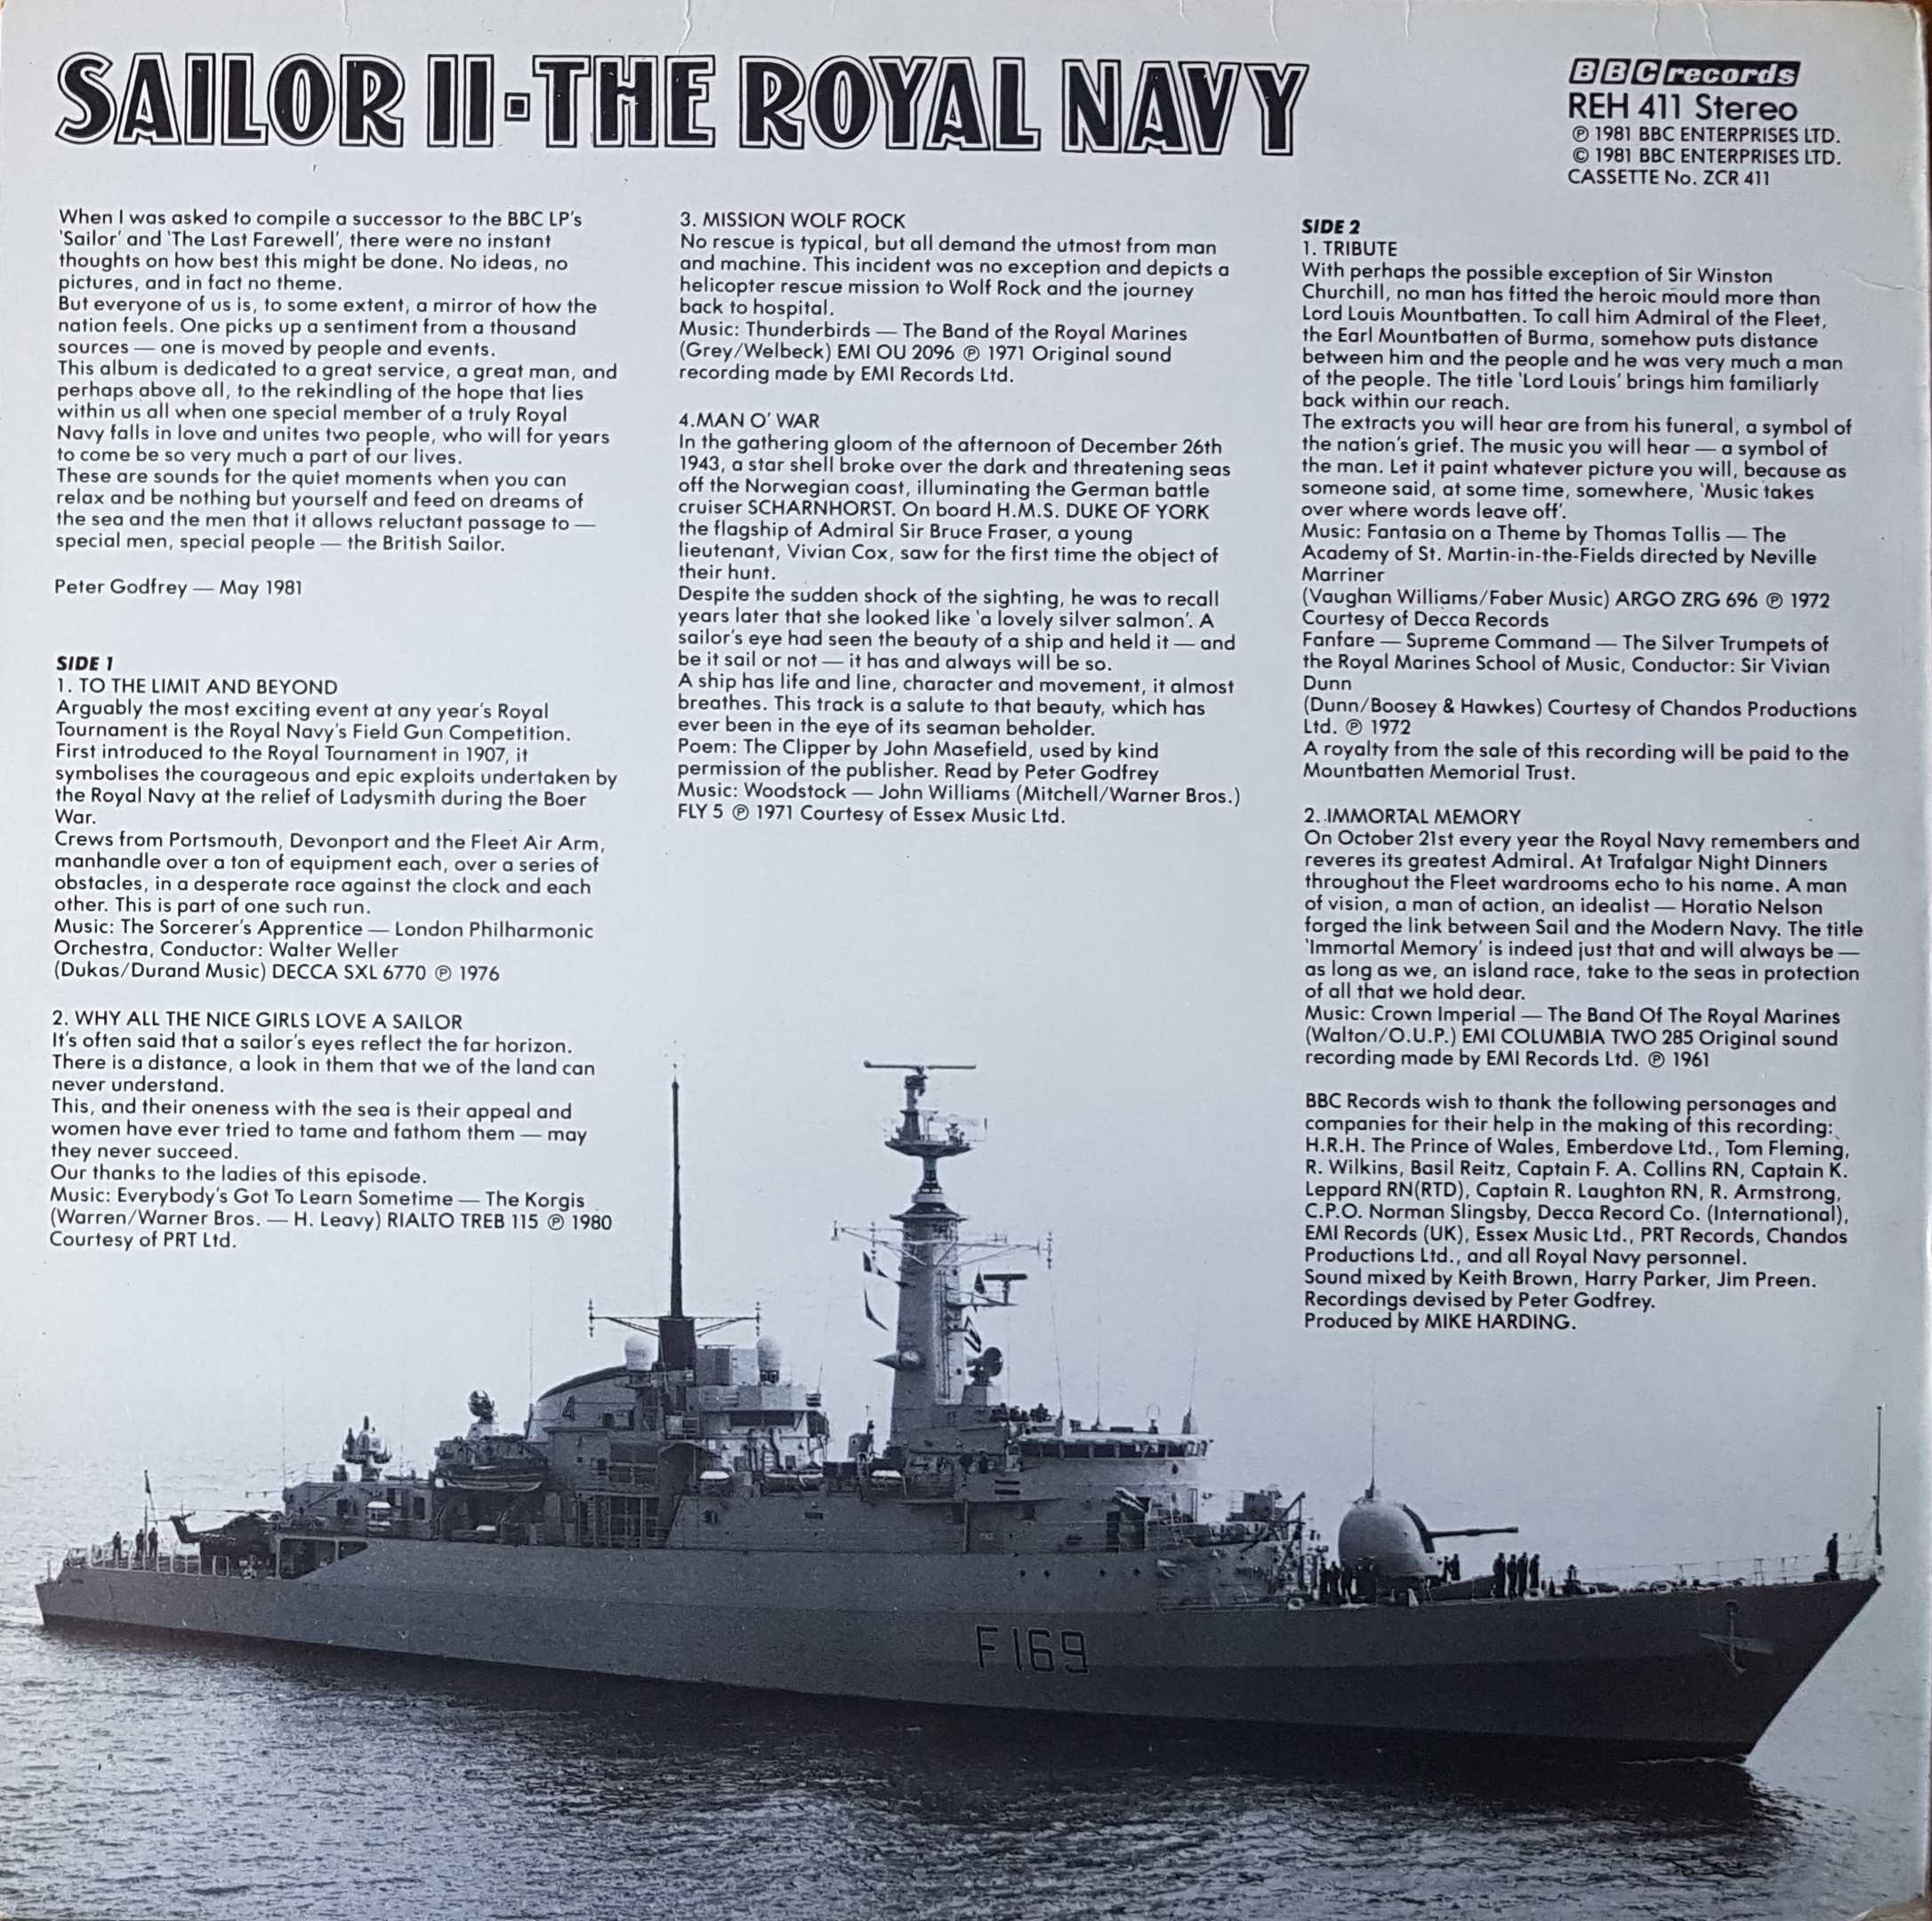 Picture of REH 411 Sailor II - The royal navy by artist Various from the BBC records and Tapes library